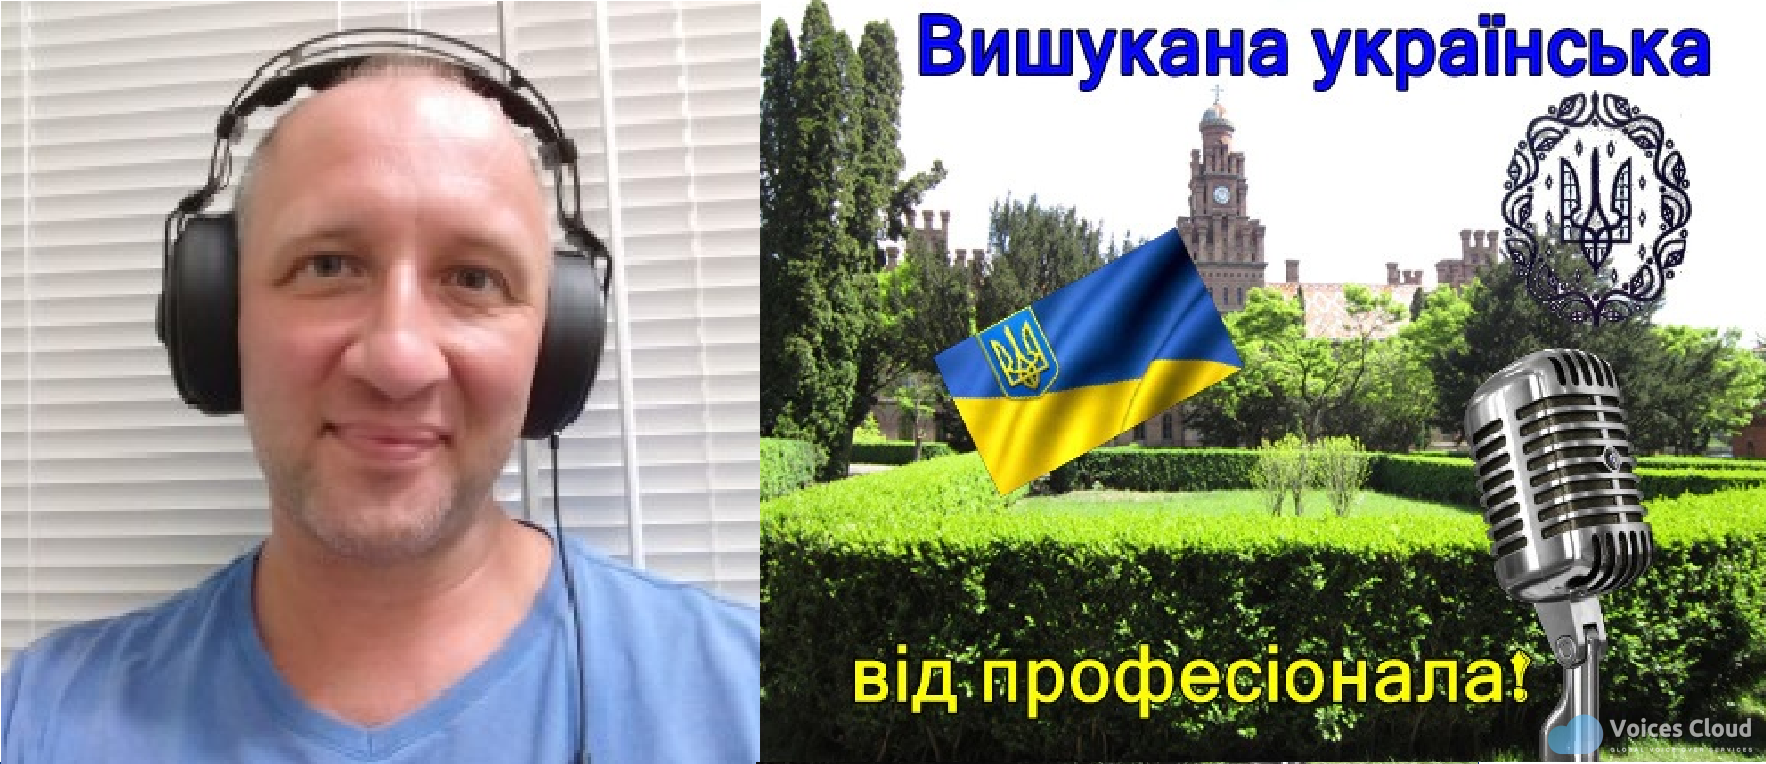 15231Professional Russian Voice Actor